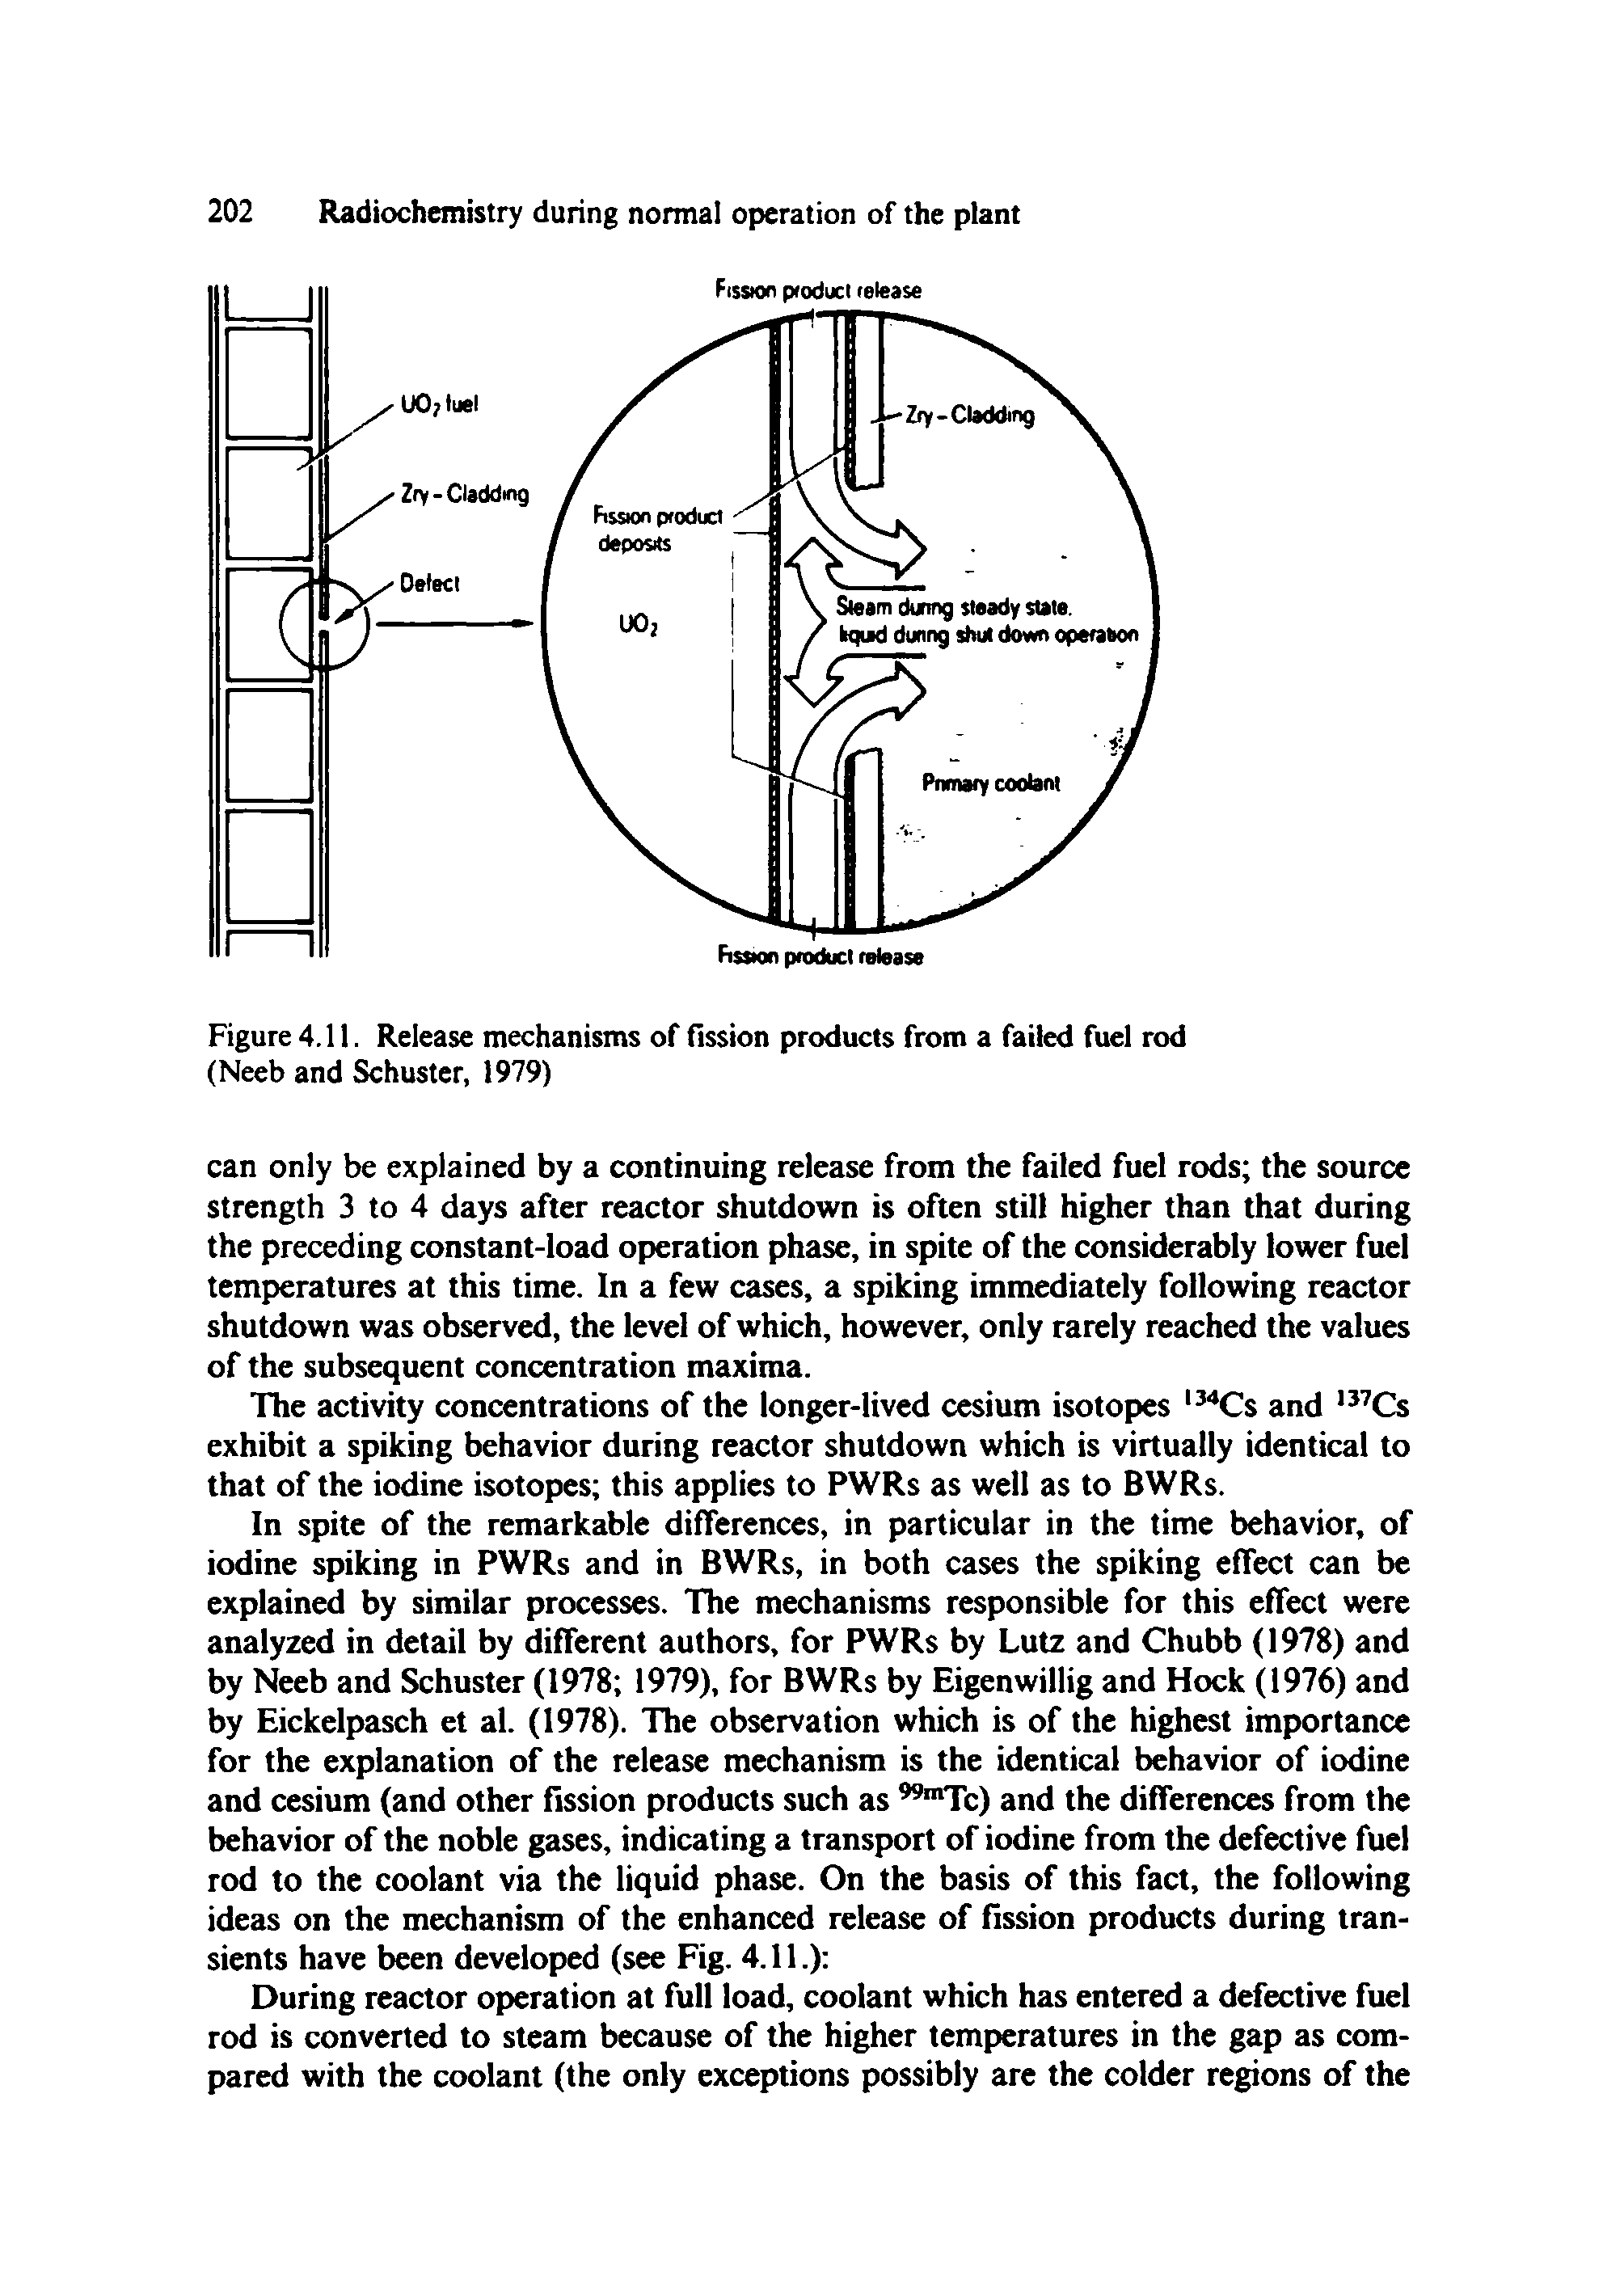 Figure 4.11. Release mechanisms of fission products from a failed fuel rod (Neeb and Schuster, 1979)...